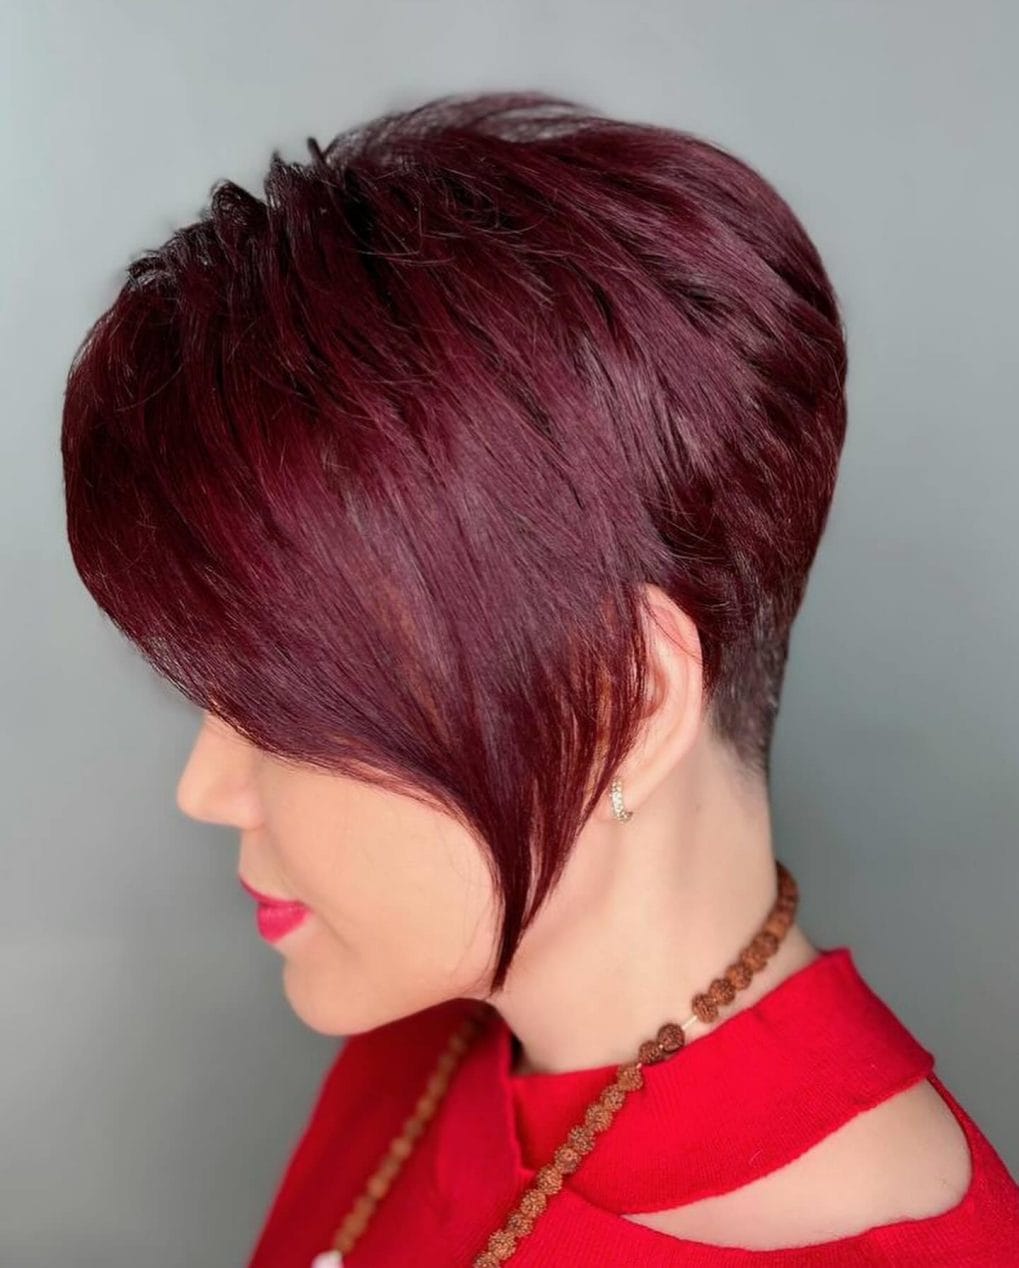 Vibrant red wedge with side-swept bangs and wavy texture